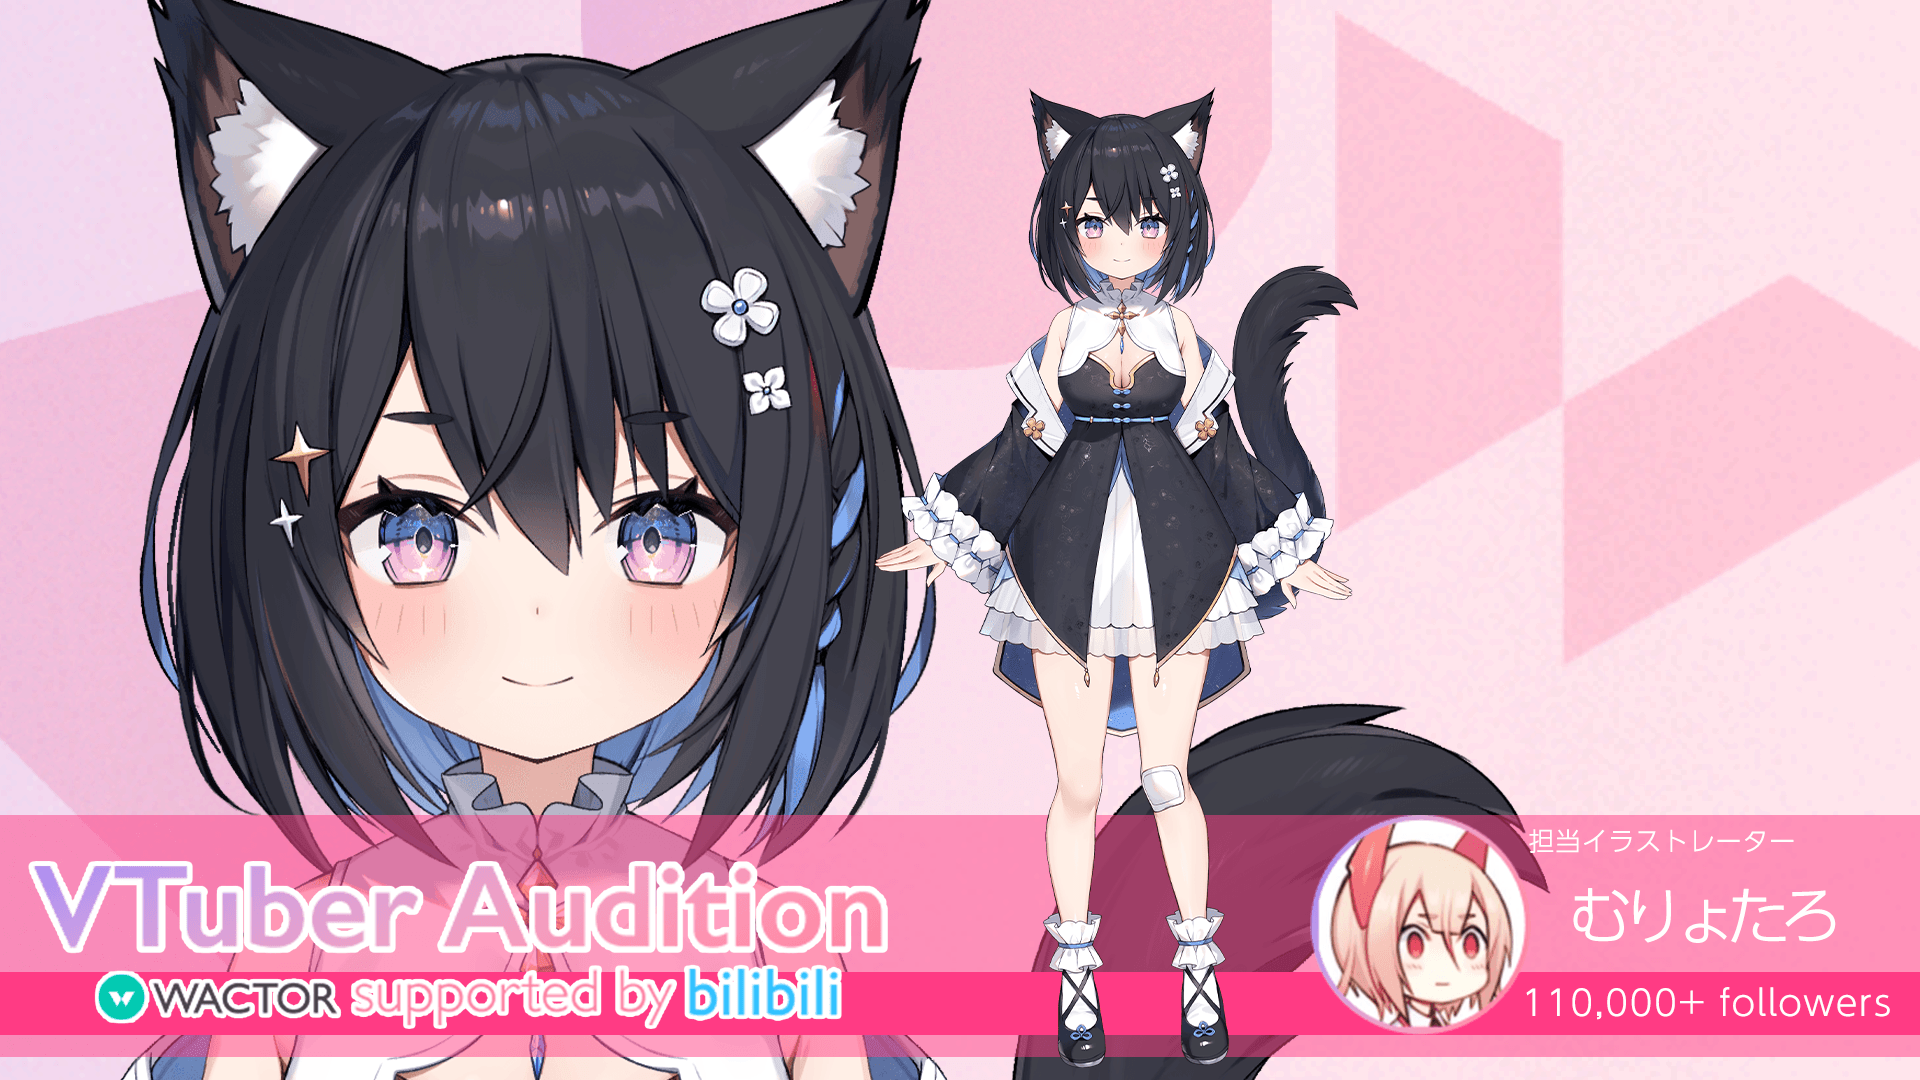 WACTOR VTuber Audition supported by bilibili (5)